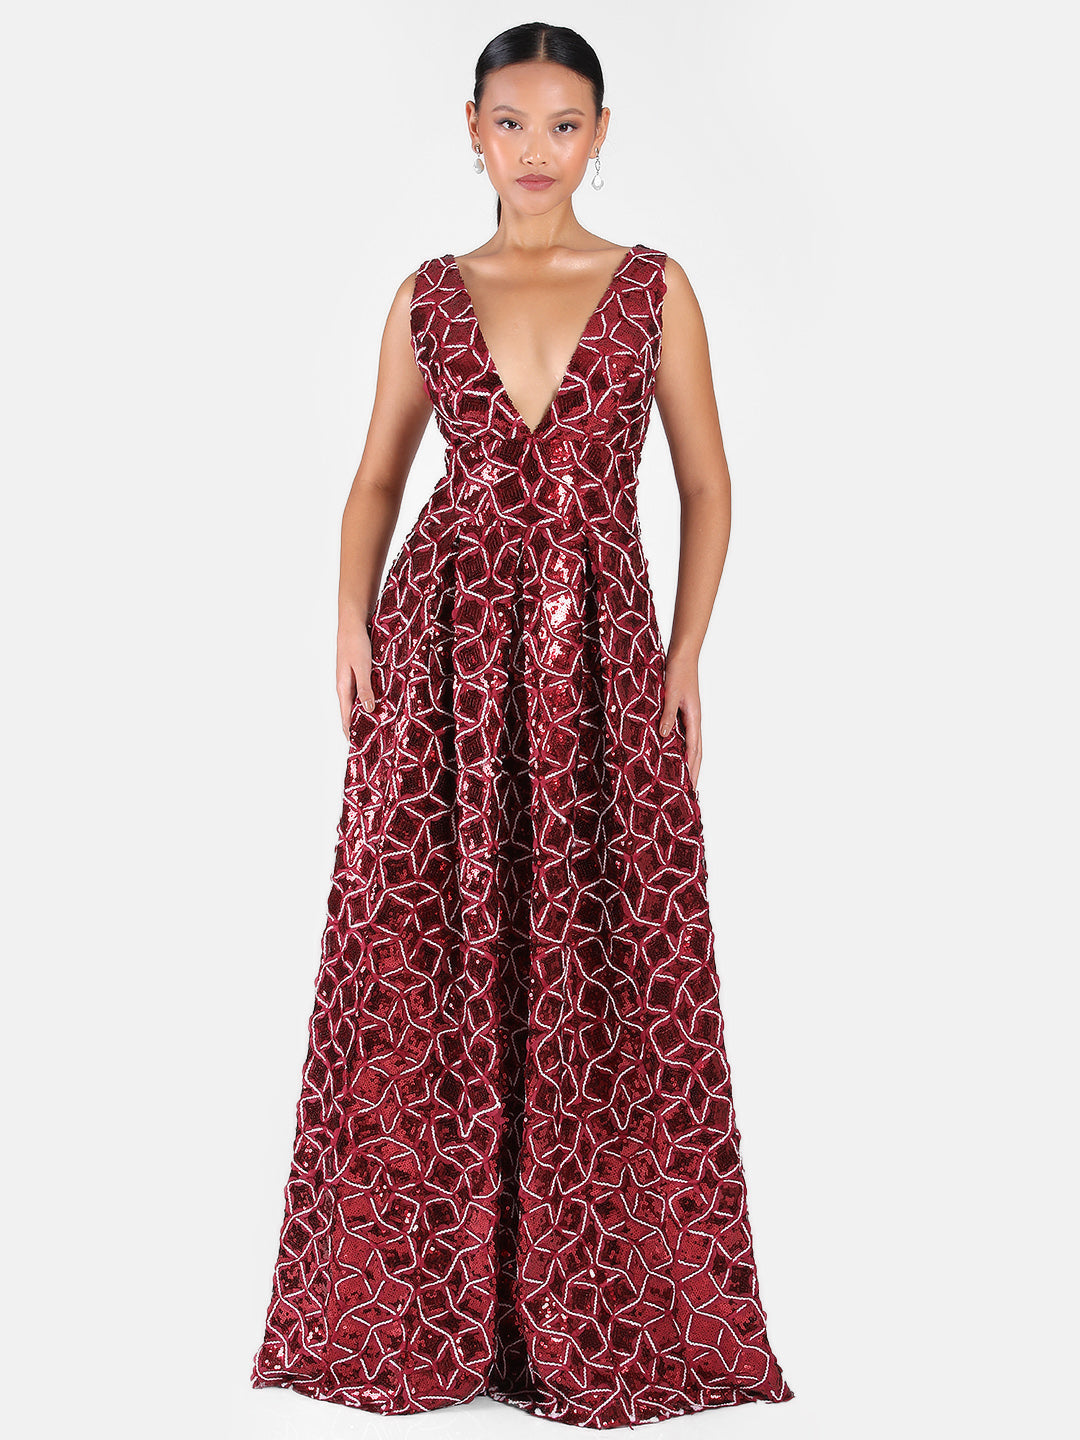 Lea Sequin Embellished Gown Red